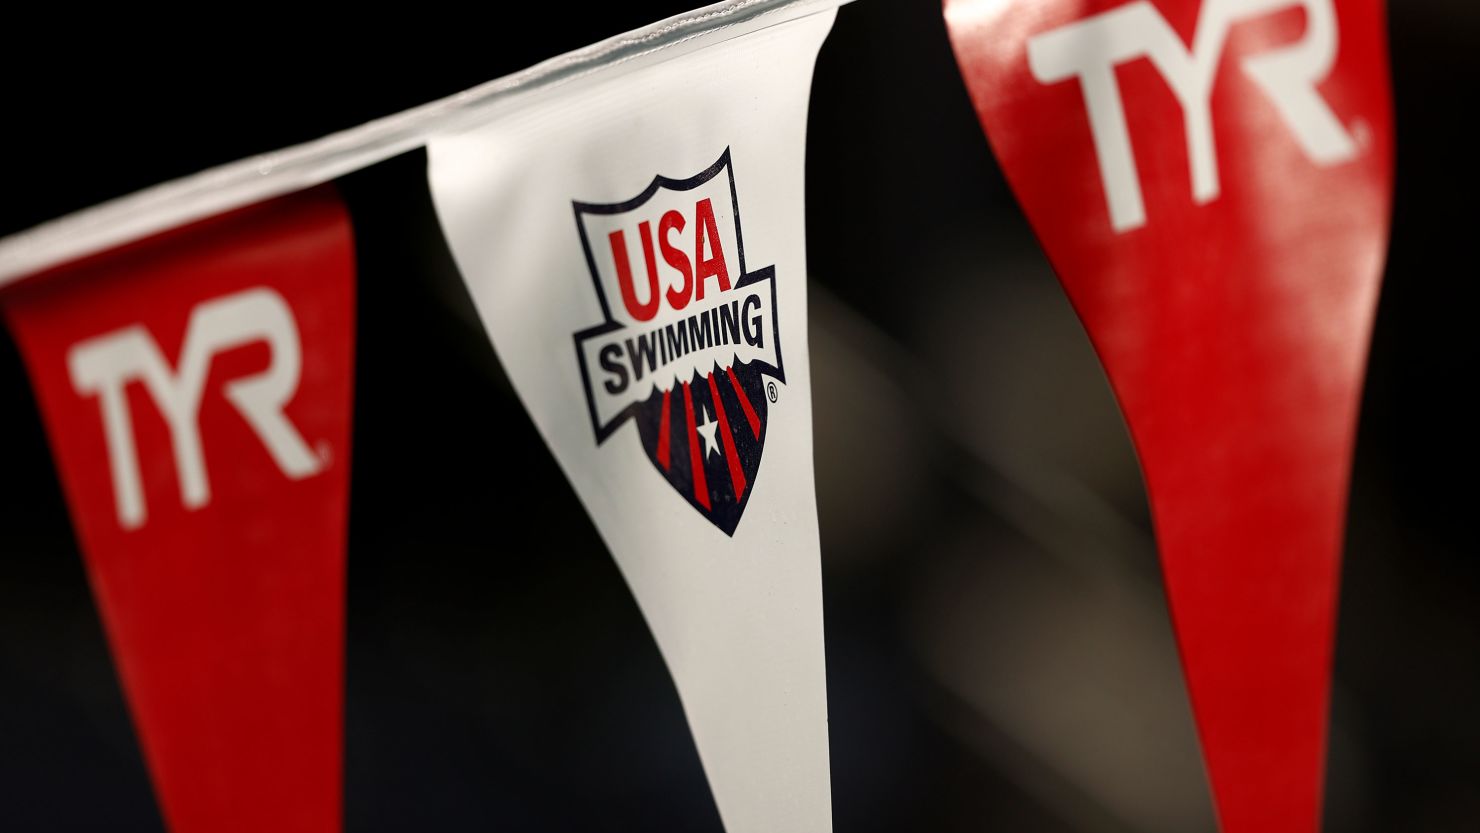 USA Swimming issued its new policy in a statement on Tuesday.